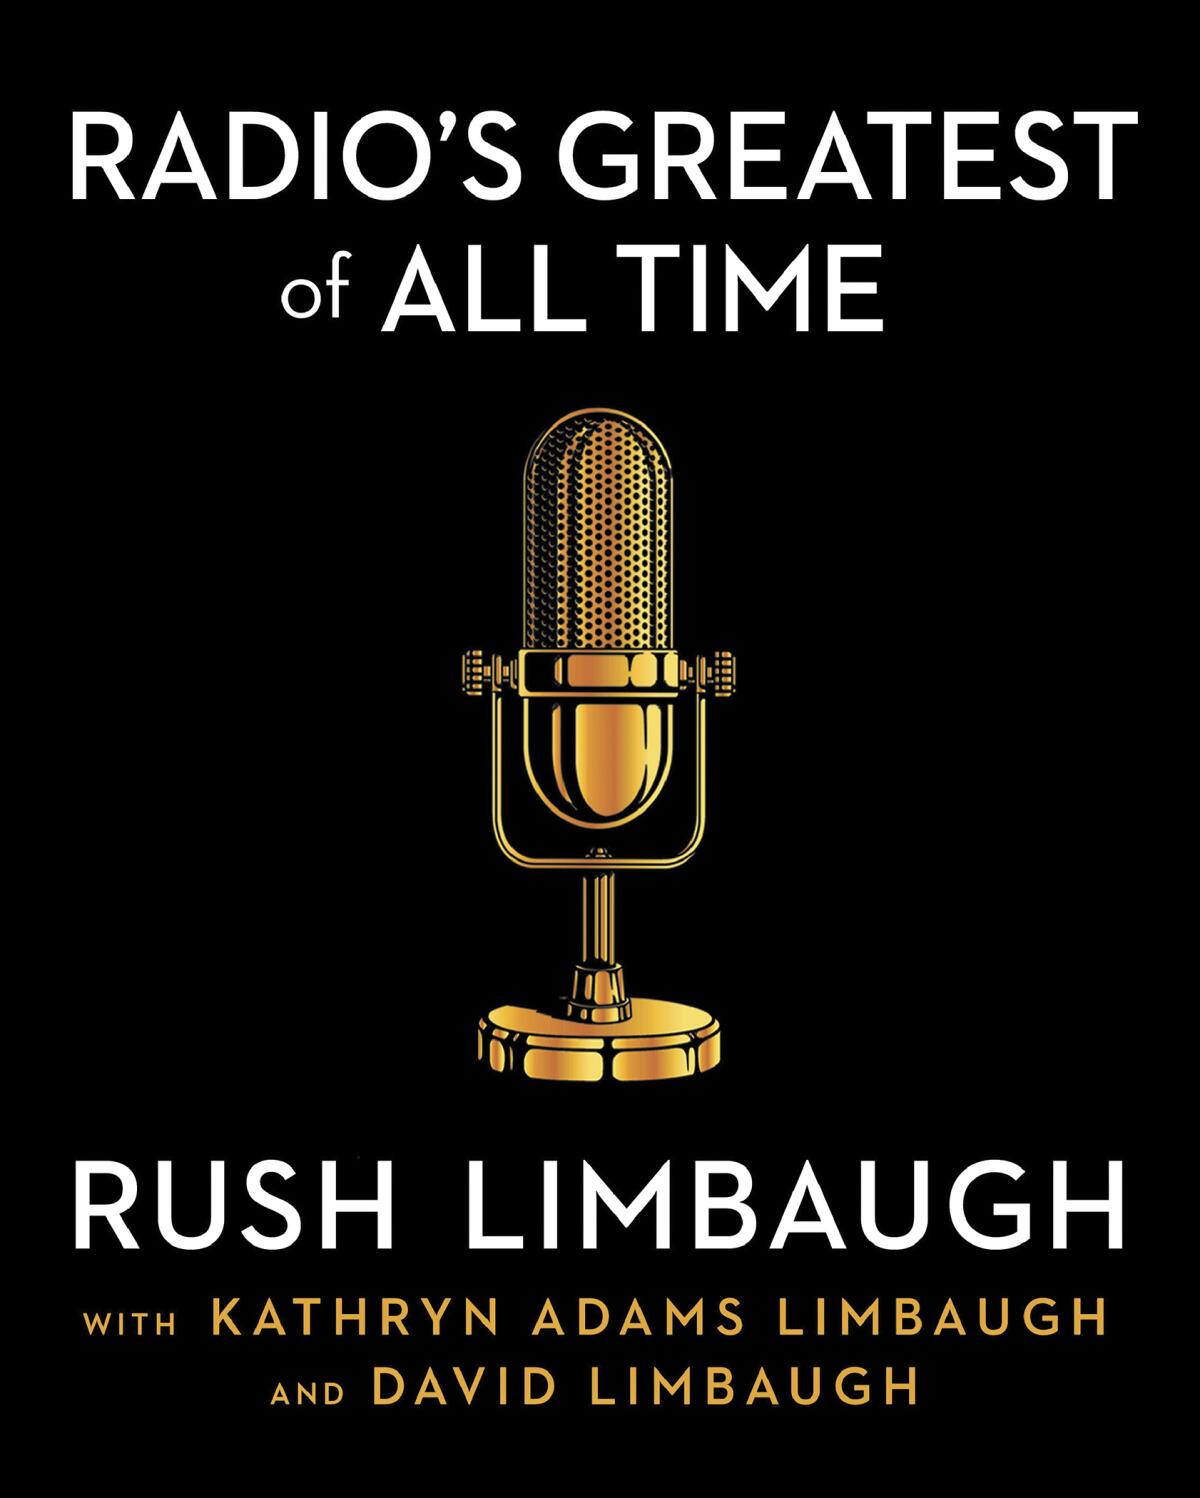 This cover image released by Threshold Editions shows “Radio’s Greatest of All Time” a compilation of radio commentary by the late Rush Limbaugh, publishing Oct. 25. The book was curated in part by Limbaugh's widow, Kathryn Adams Limbaugh, and his brother, David Limbaugh. (Threshold Editions via AP)